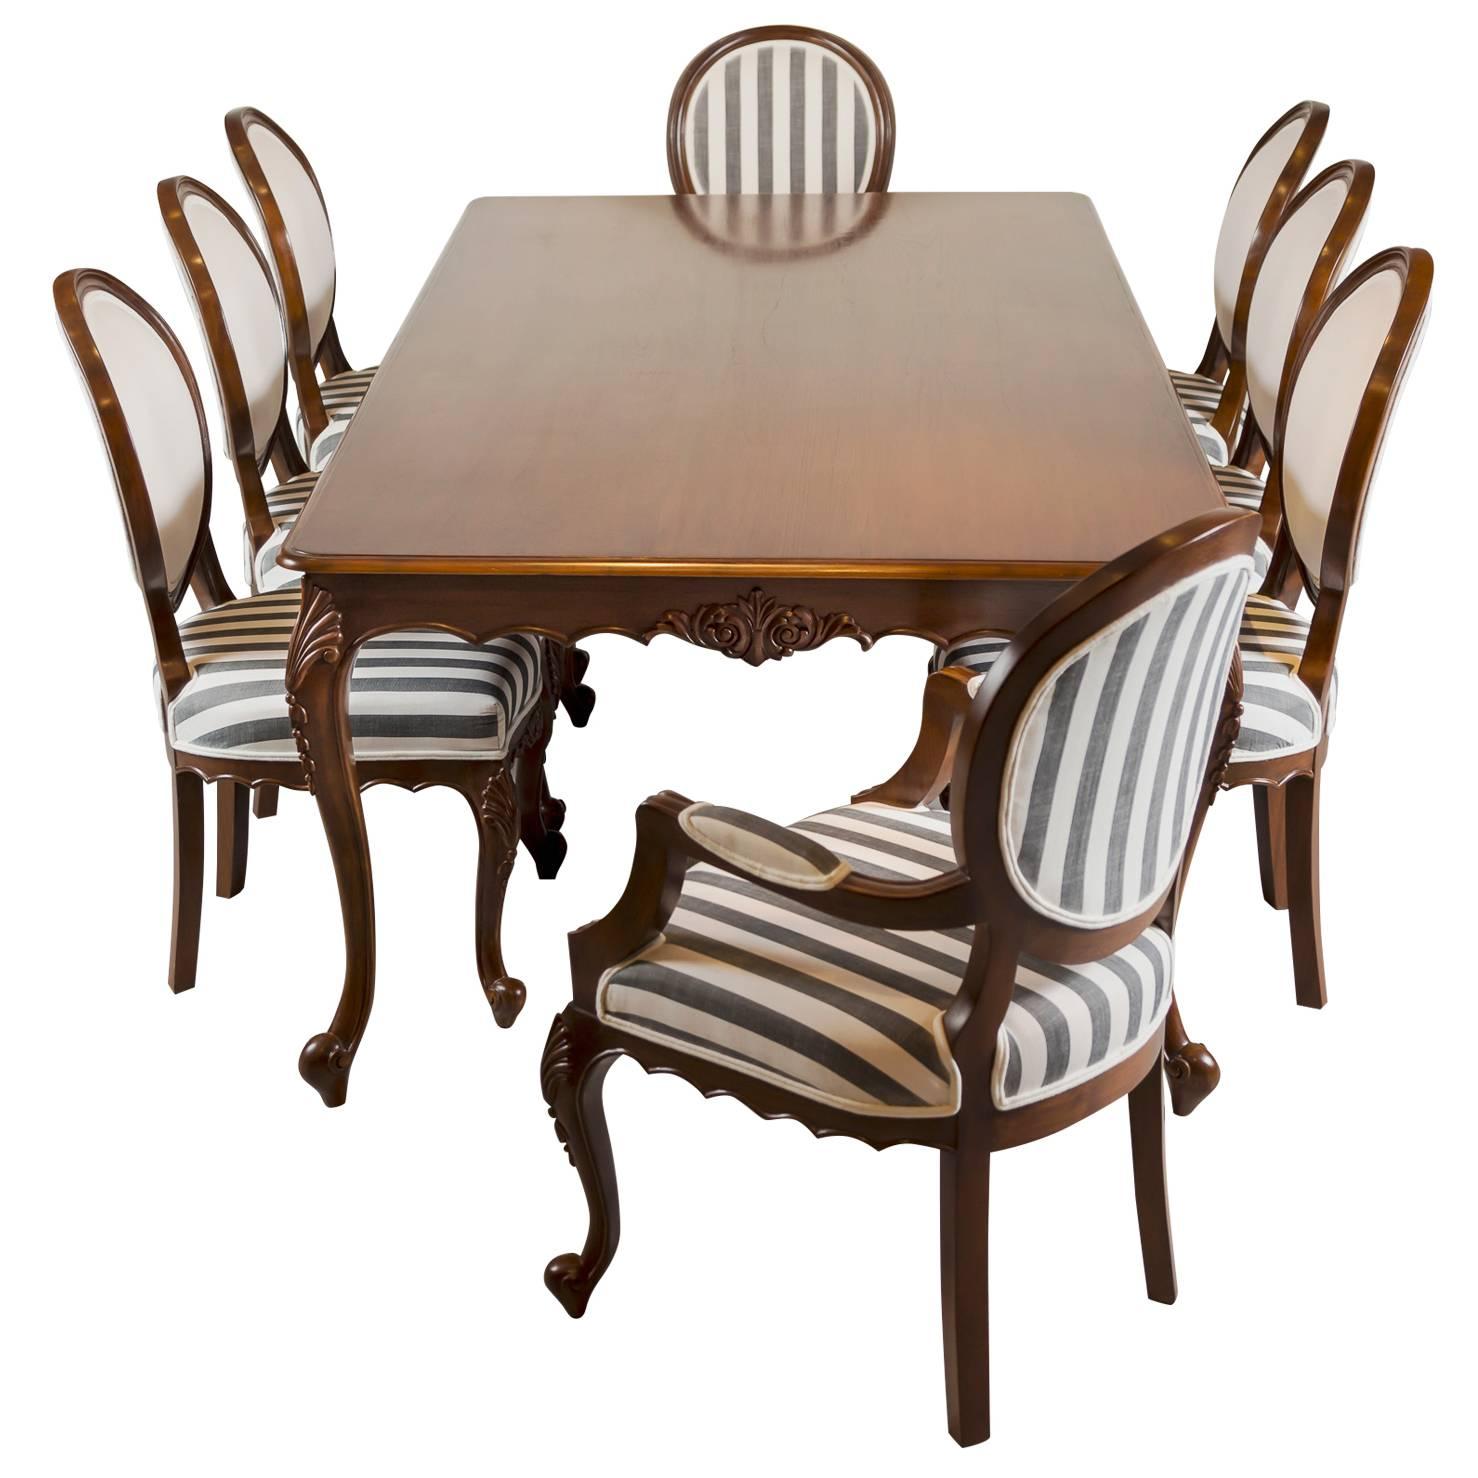 Antique Anglo-Indian Teak Wood Dining Table with Eight Chairs For Sale